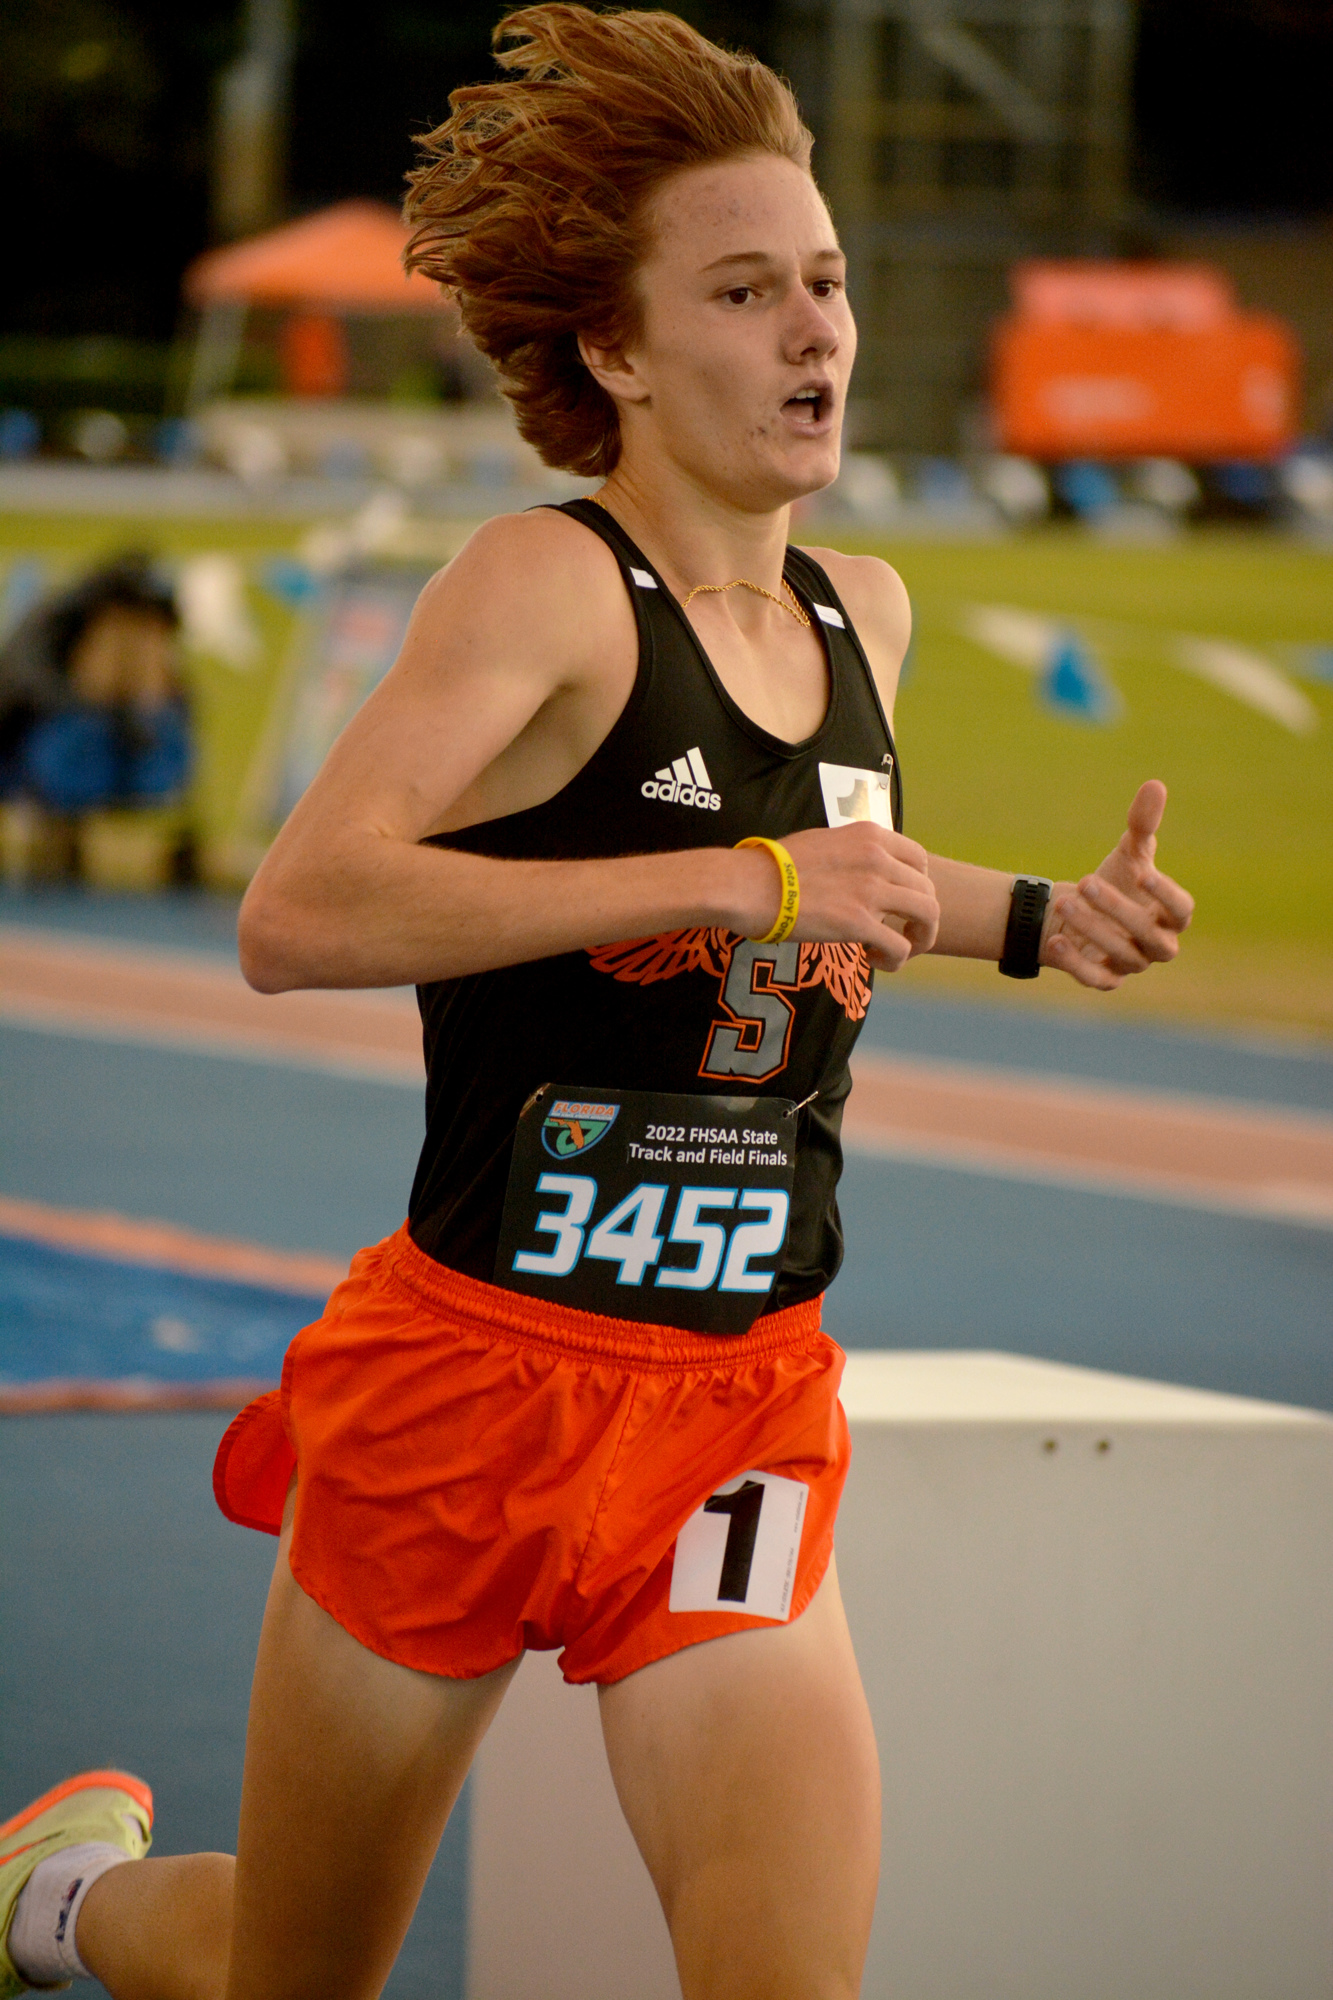 Sarasota High junior Alec Miller finished second in the Class 4A boys 1,600 meter run at the FHSAA track and field championships.